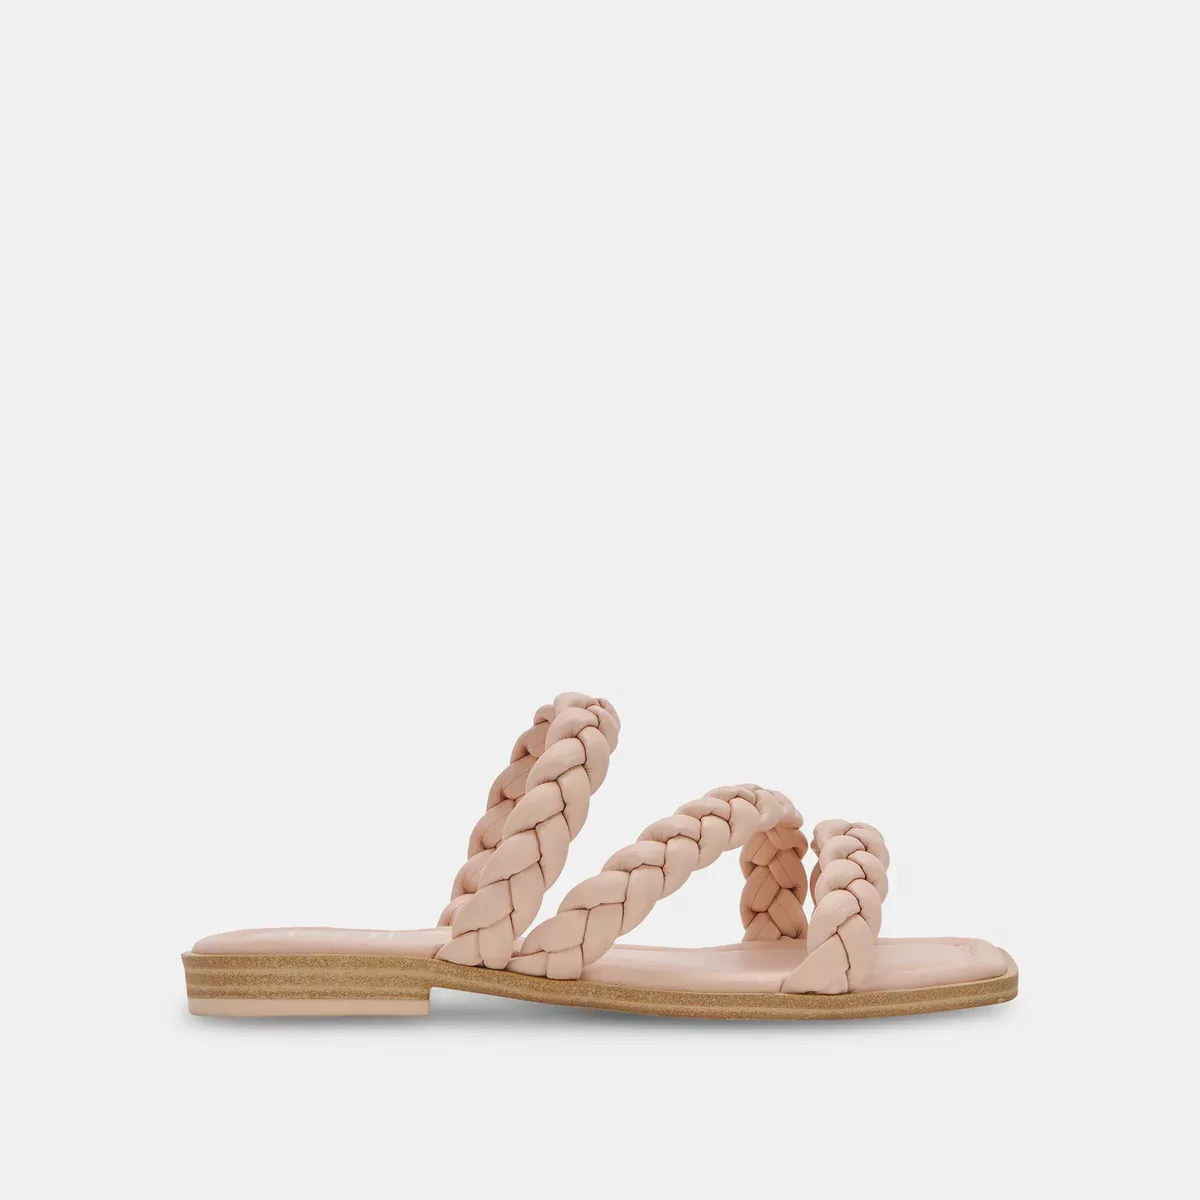 There's no tip toeing around in these #louisvuitton #sandals